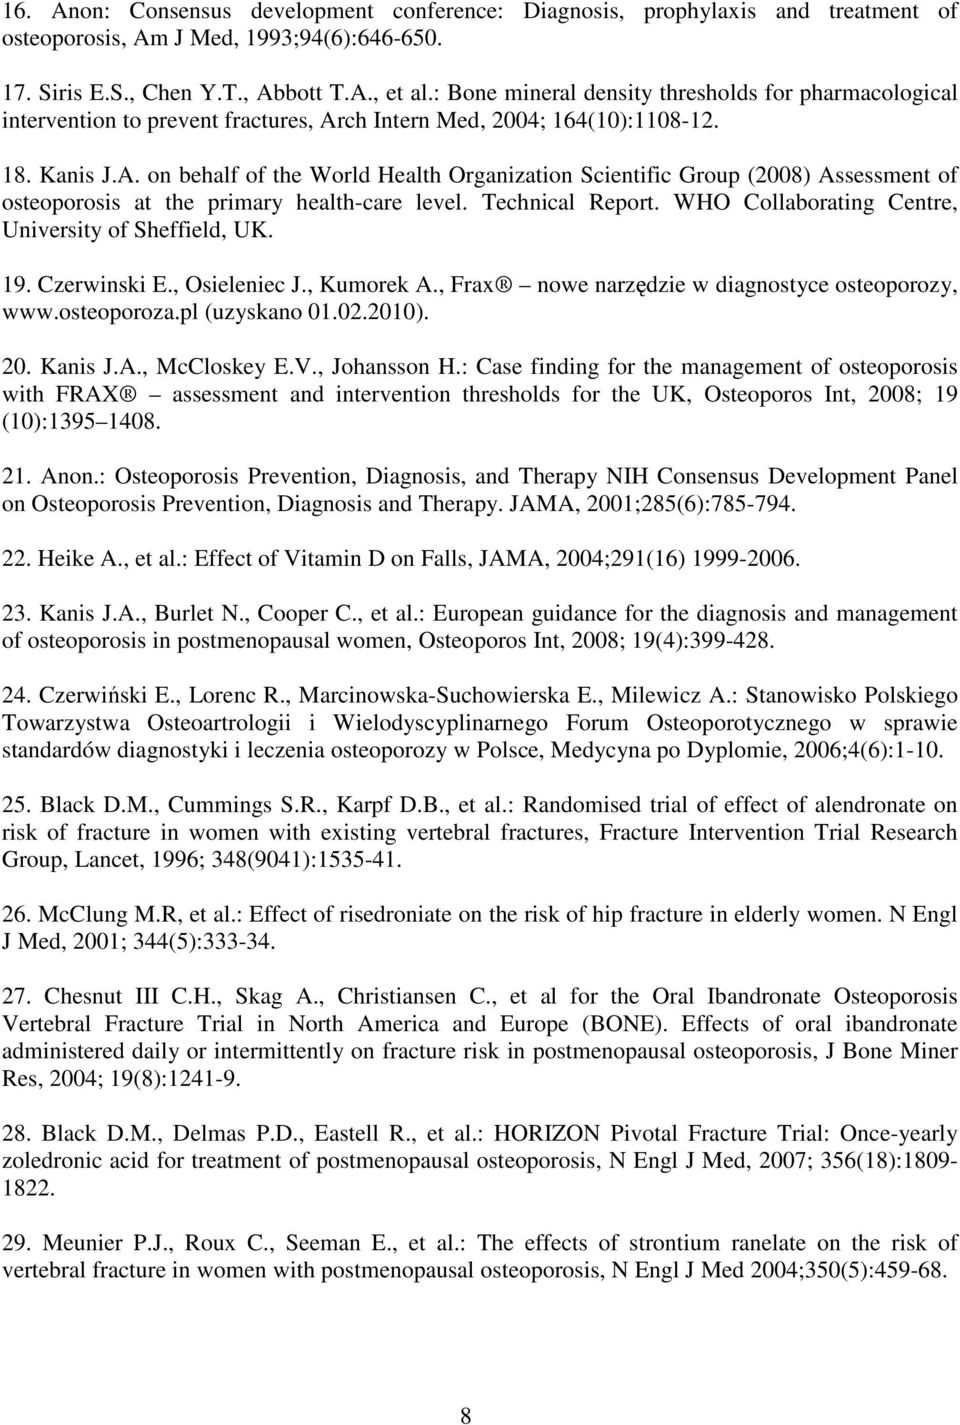 ch Intern Med, 2004; 164(10):1108-12. 18. Kanis J.A. on behalf of the World Health Organization Scientific Group (2008) Assessment of osteoporosis at the primary health-care level. Technical Report.